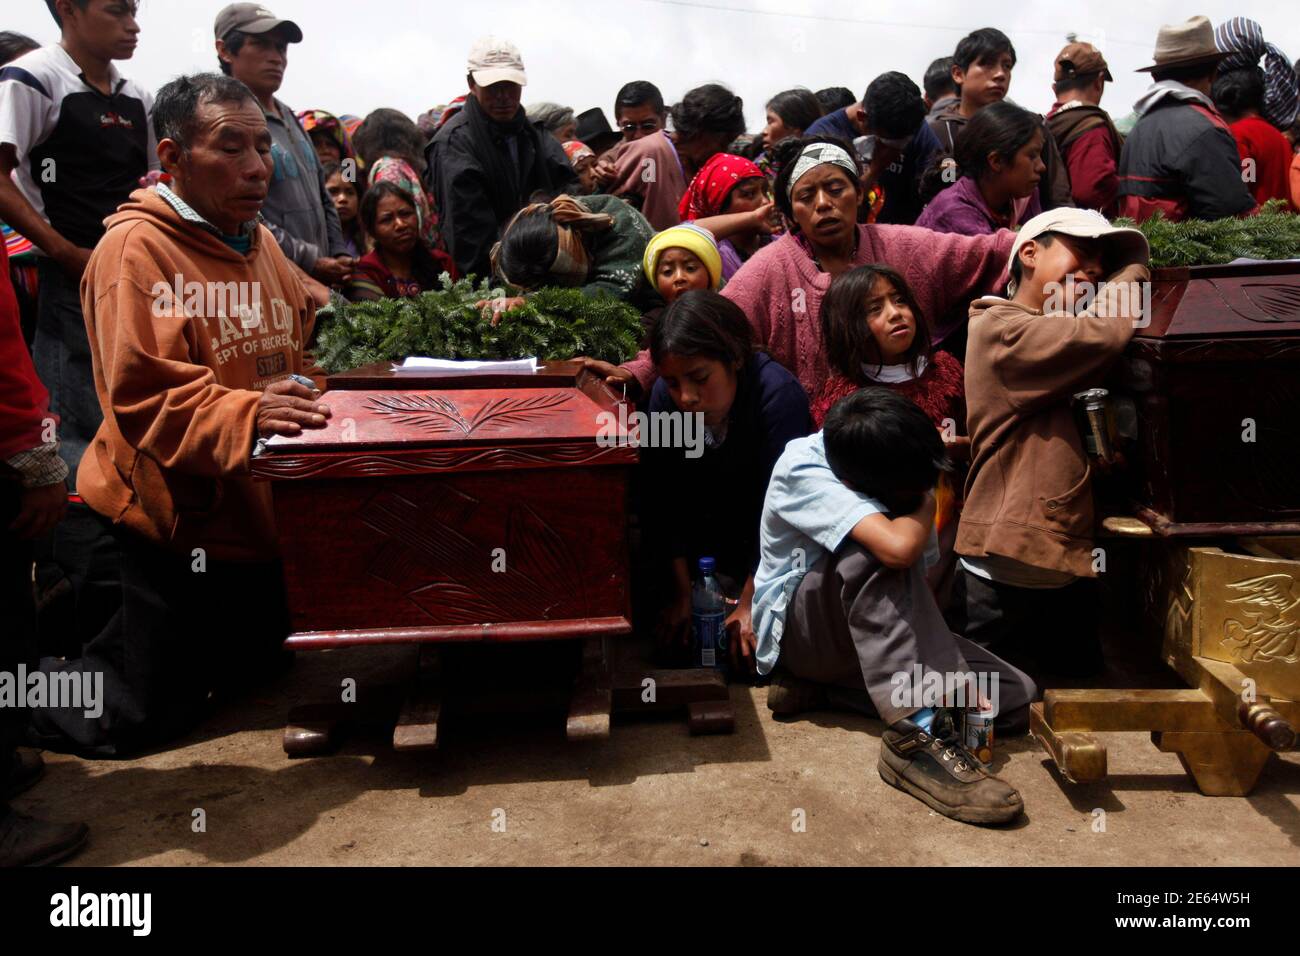 Relatives cry next to coffins during the funeral of 13 victims of a landslide in the village of Parrasquin in Nahuala, September 6, 2010. A massive landslide buried a crowd trying to dig out a bus from deep mud on Sunday, killing at least 22 people, with dozens more feared dead, as torrential rains battered Guatemala. REUTERS/Edgard Garrido(GUATEMALA - Tags: DISASTER SOCIETY) Stock Photo